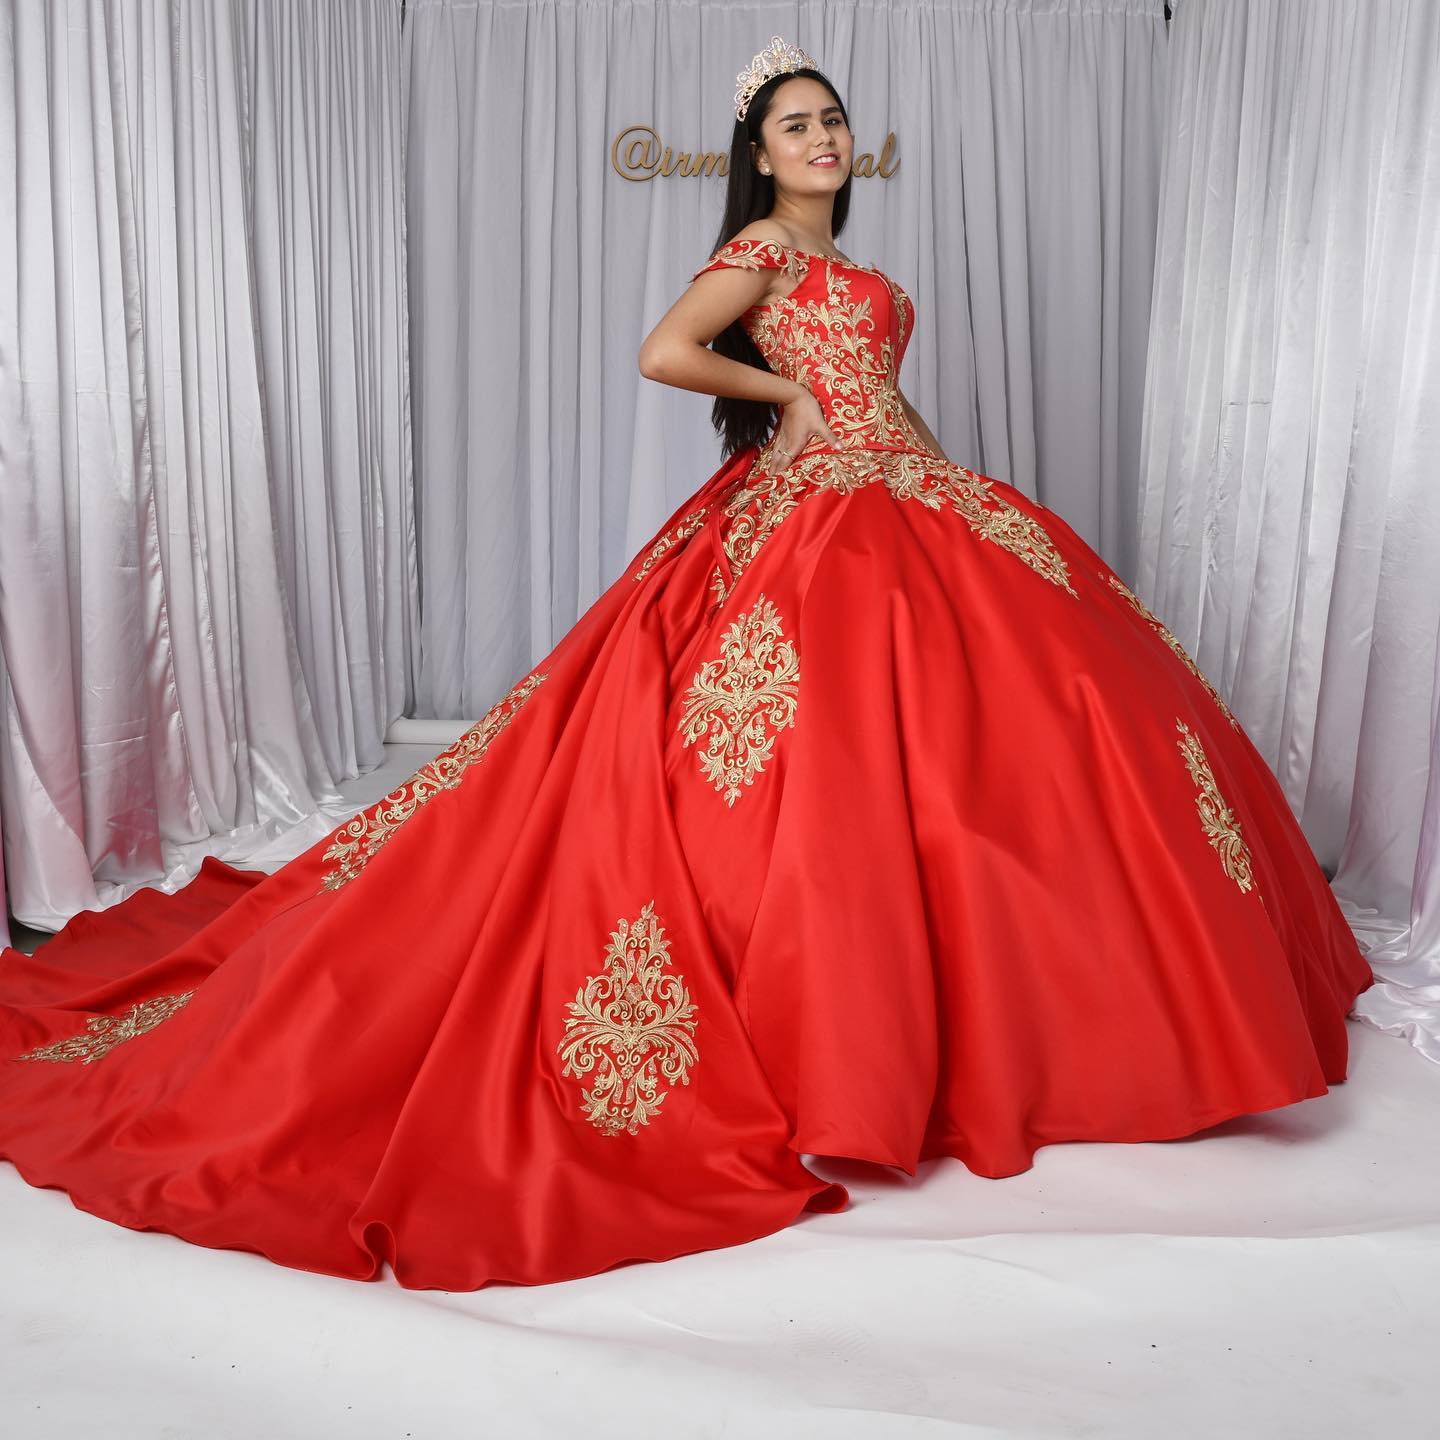 red and gold quinceanera dress,red quinceanera with gold embroidery,quinceanera mall 2 piece dress,2 piece detachable skirt quinceanera dress,red modern quinceanera dress,red sweet 16 dress,red quinceanera dress,chinese quinceanera dress factory,quinceanera dress satin layers,